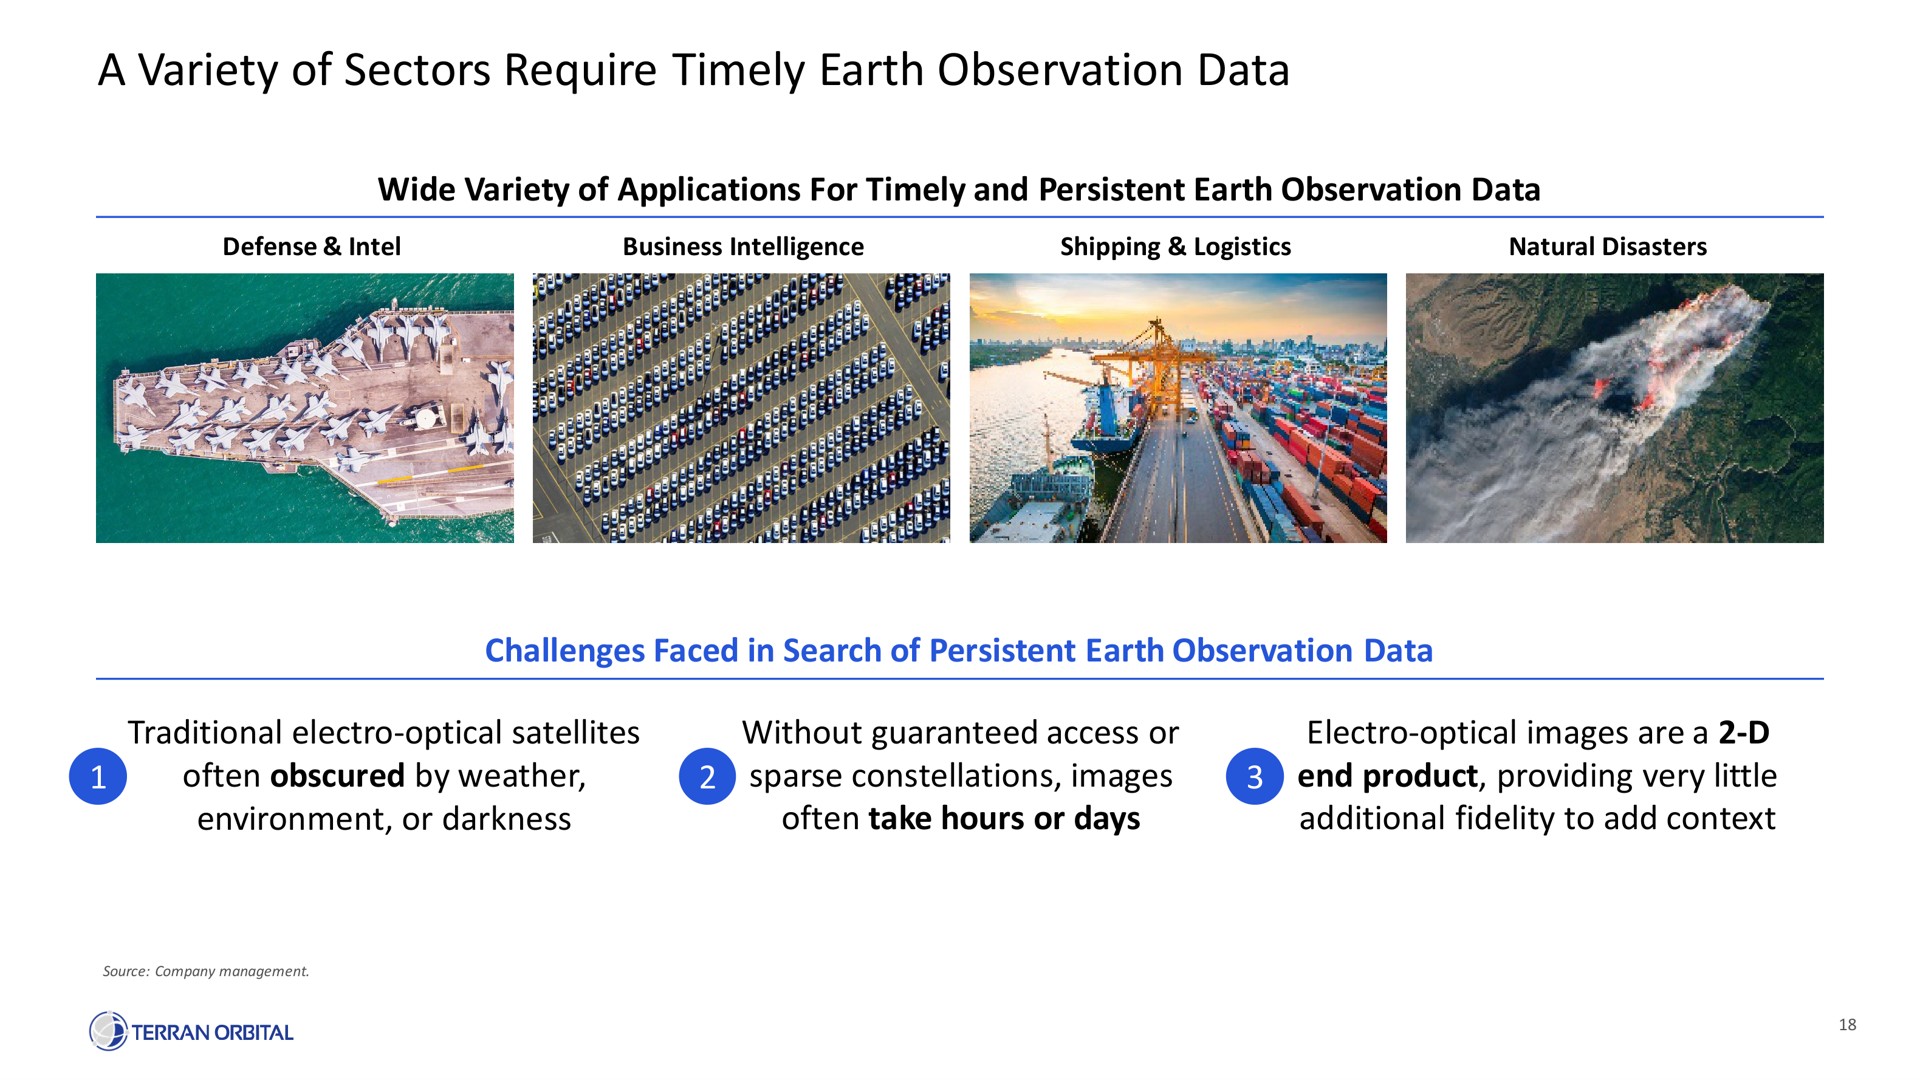 a variety of sectors require timely earth observation data | Terran Orbital